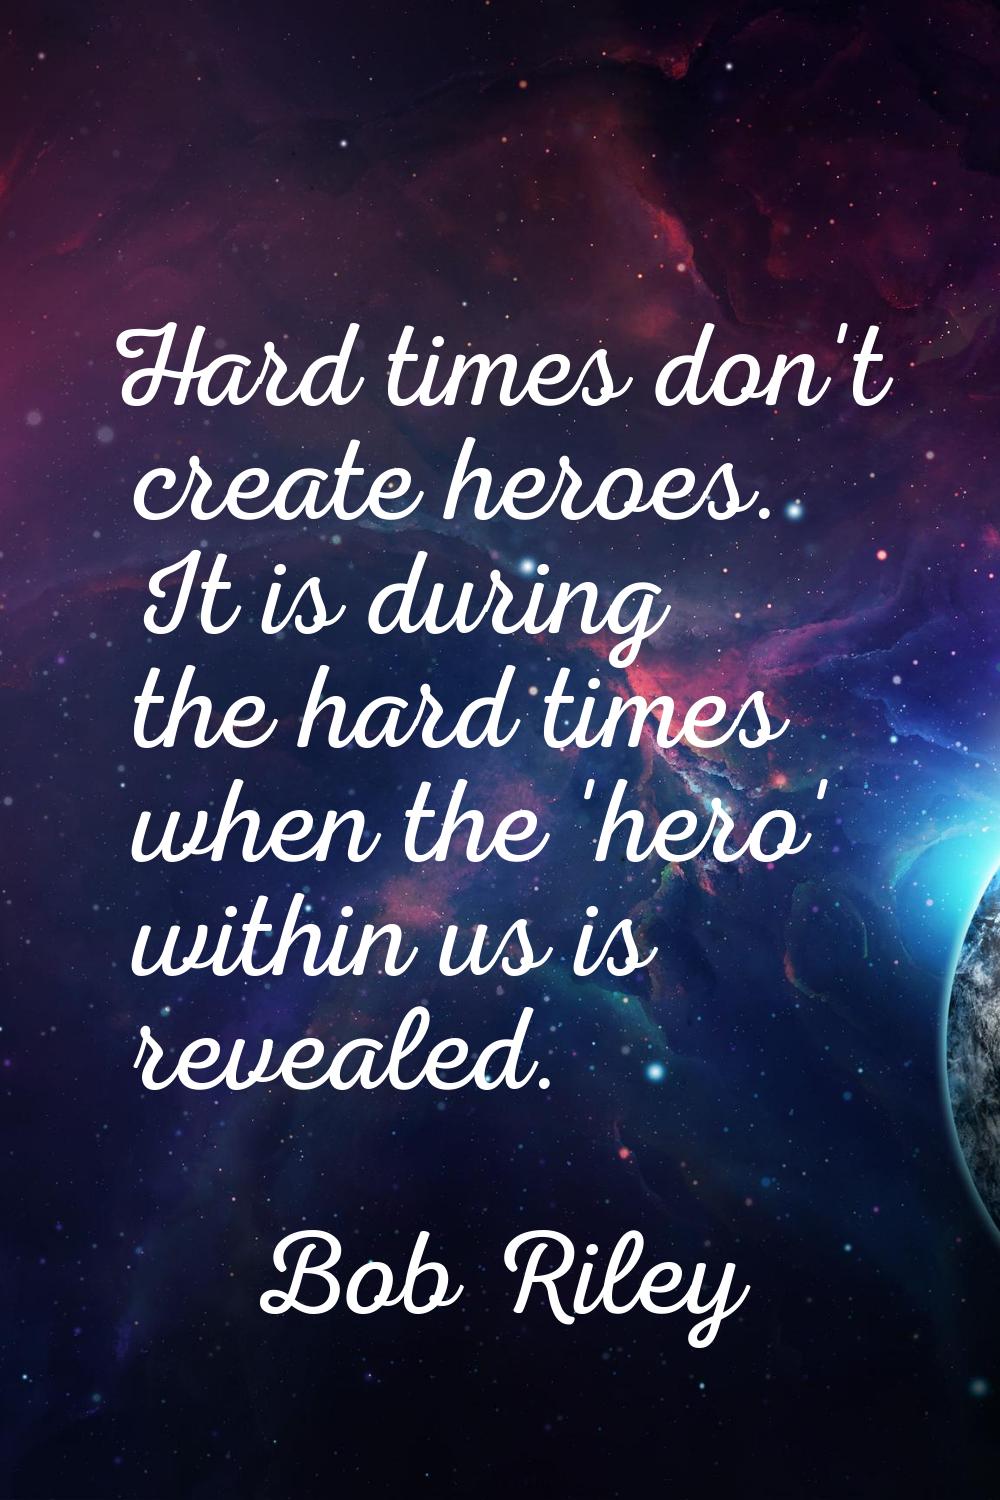 Hard times don't create heroes. It is during the hard times when the 'hero' within us is revealed.